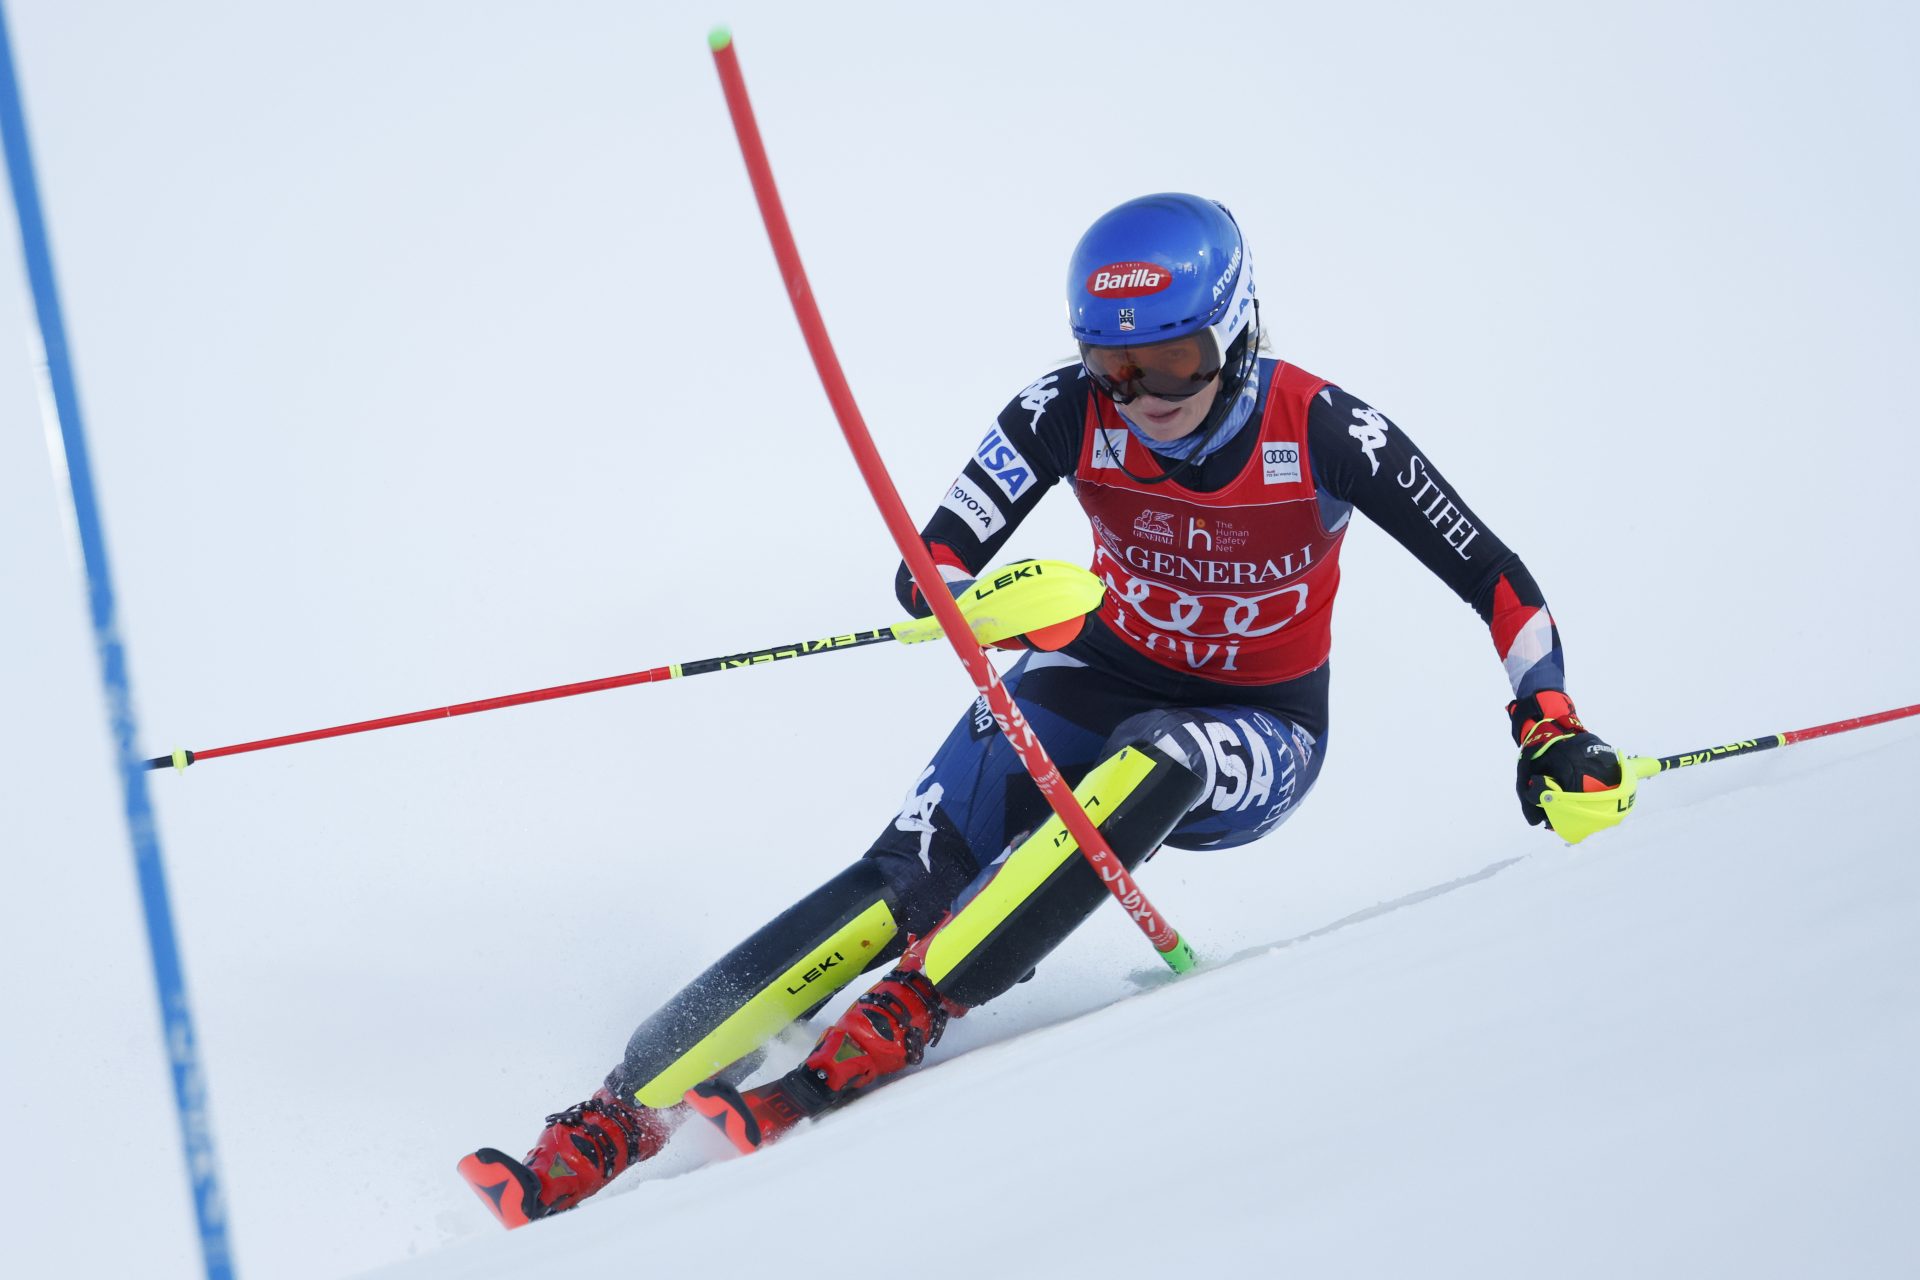 FIS Alpine Skiing World Cup Finals